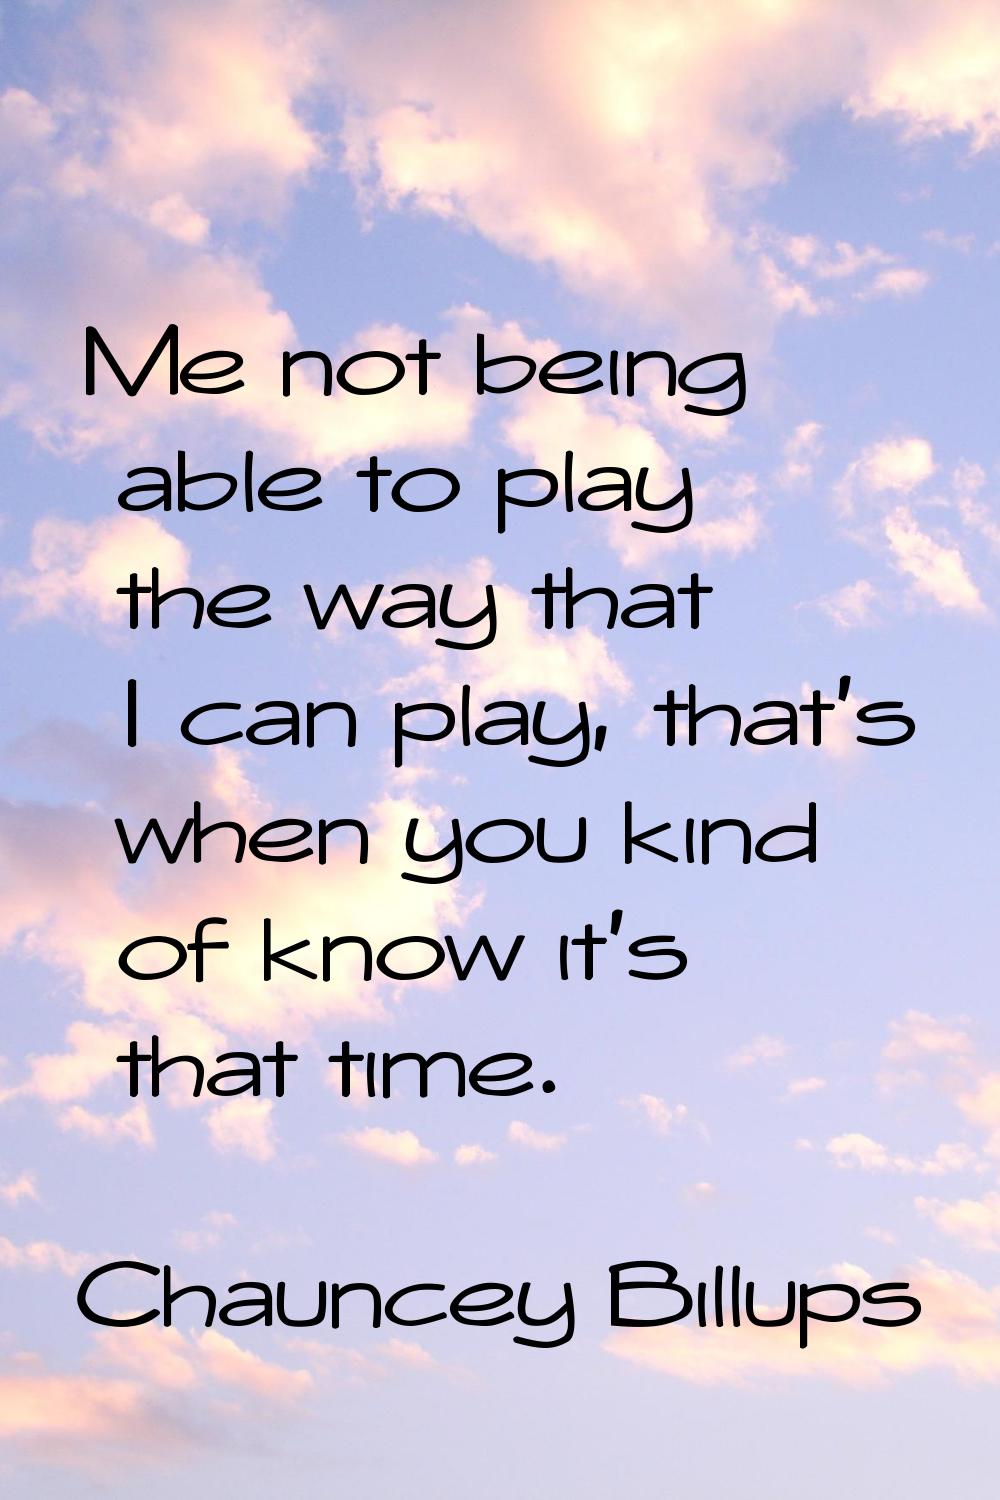 Me not being able to play the way that I can play, that's when you kind of know it's that time.